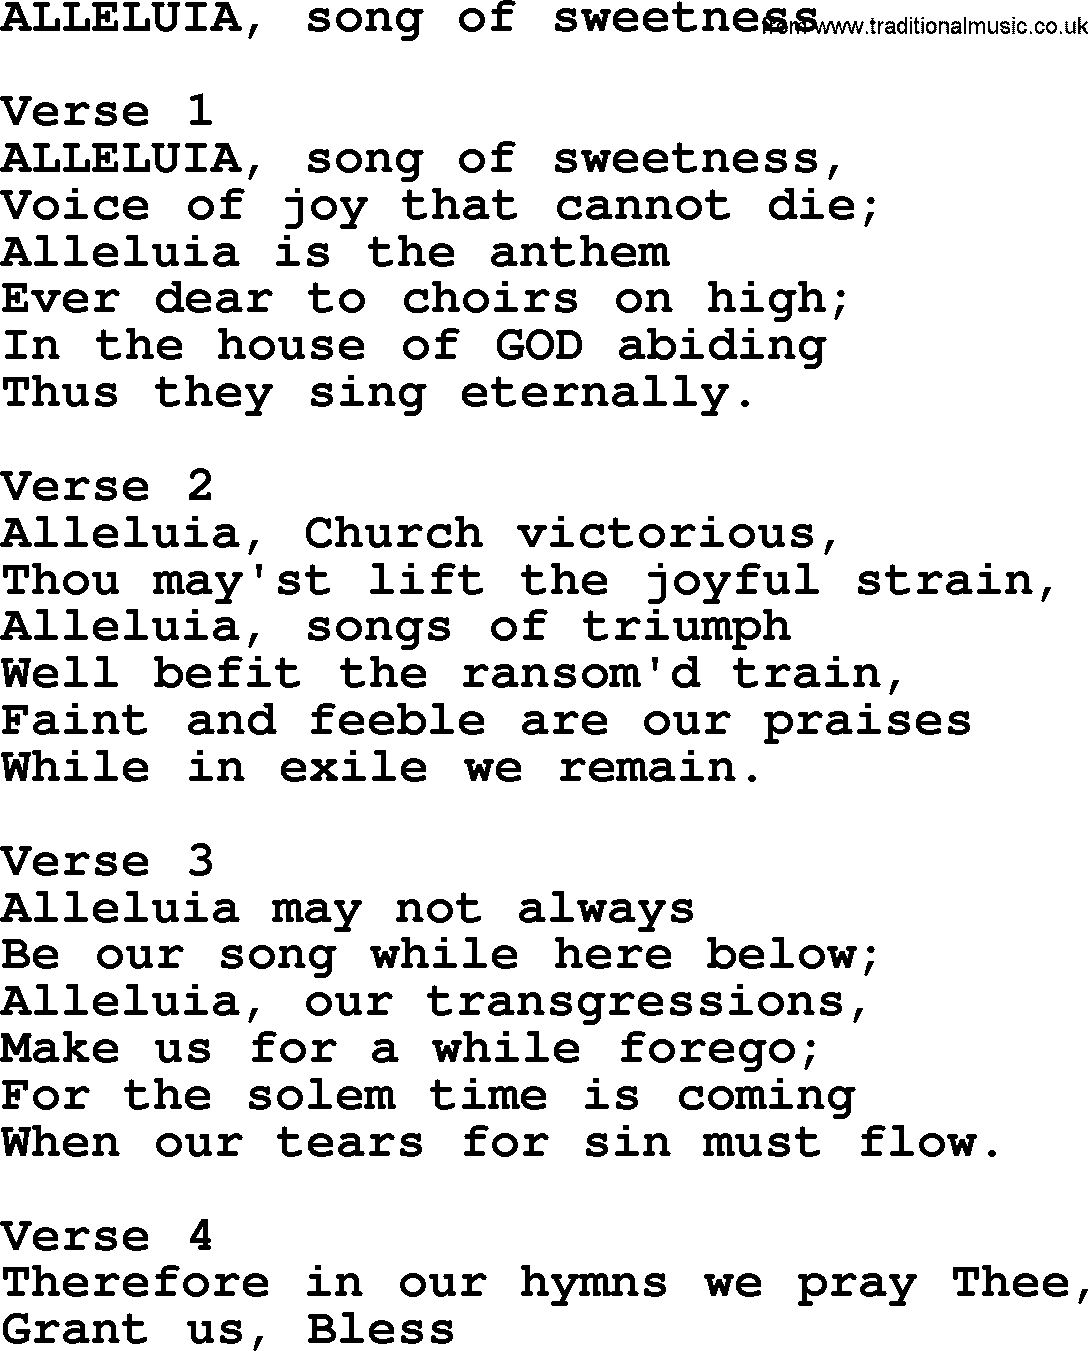 Apostolic and Pentecostal Hymns and Gospel Songs, Hymn: Alleluia, Song Of Sweetness, Christian lyrics and PDF